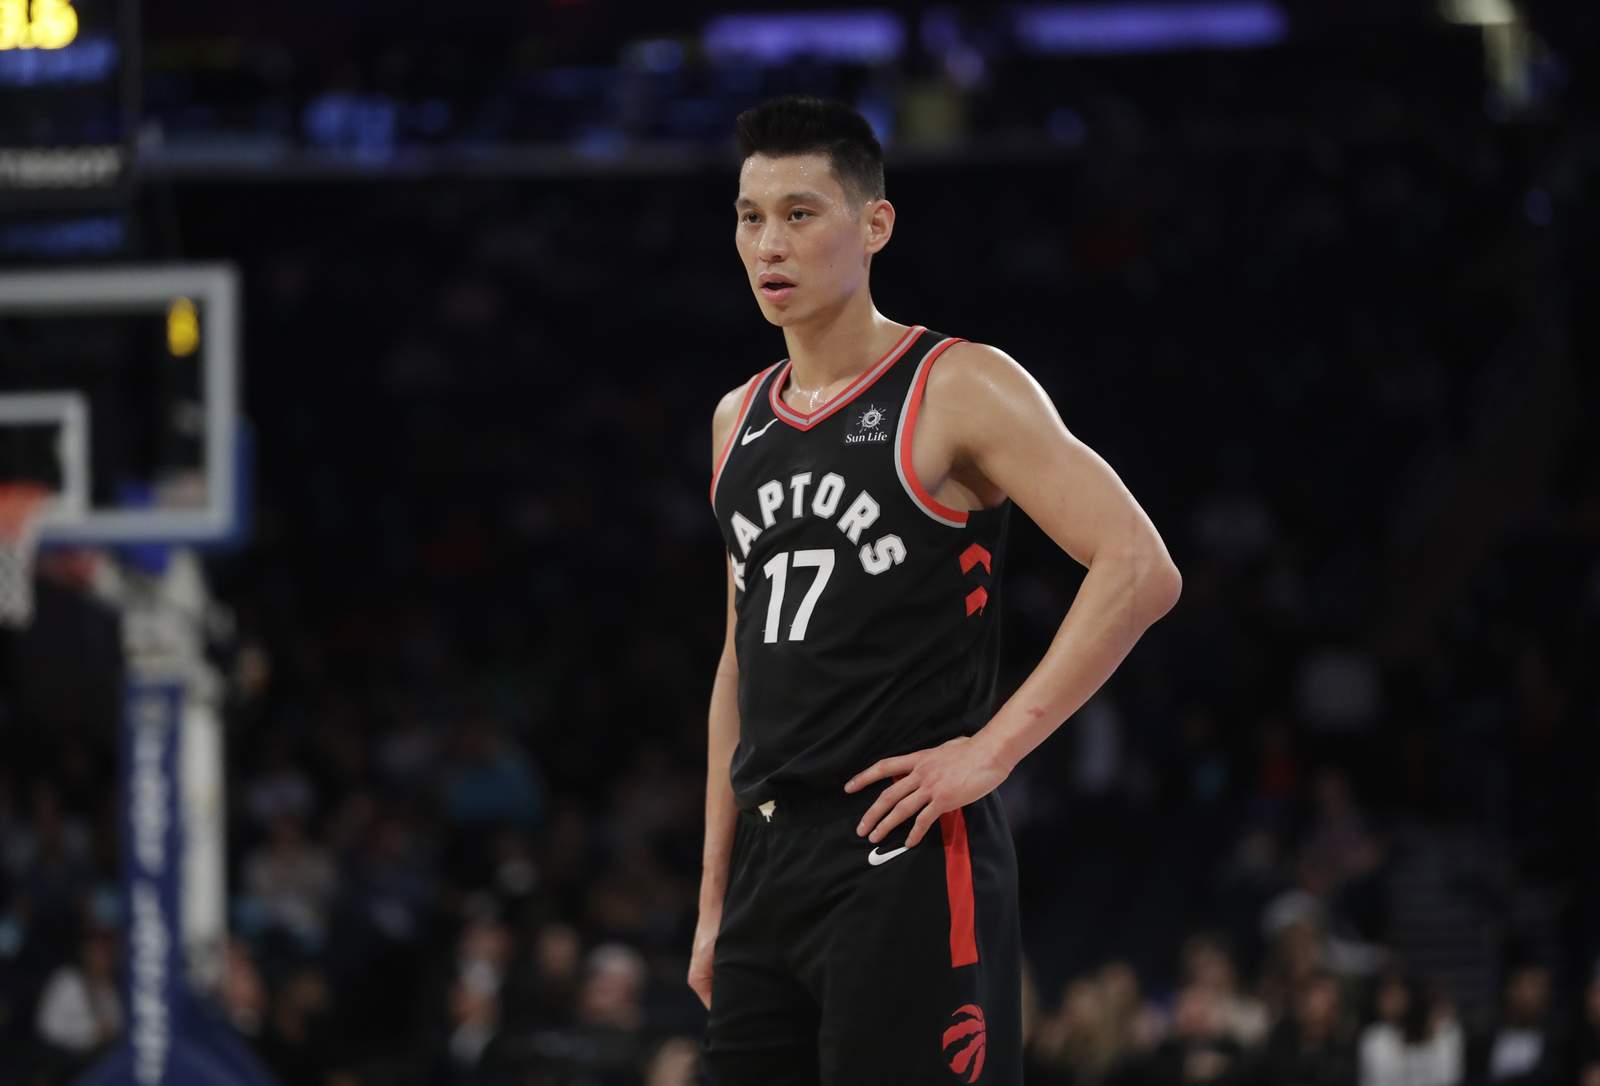 Warriors G League G Jeremy Lin experienced racism on court